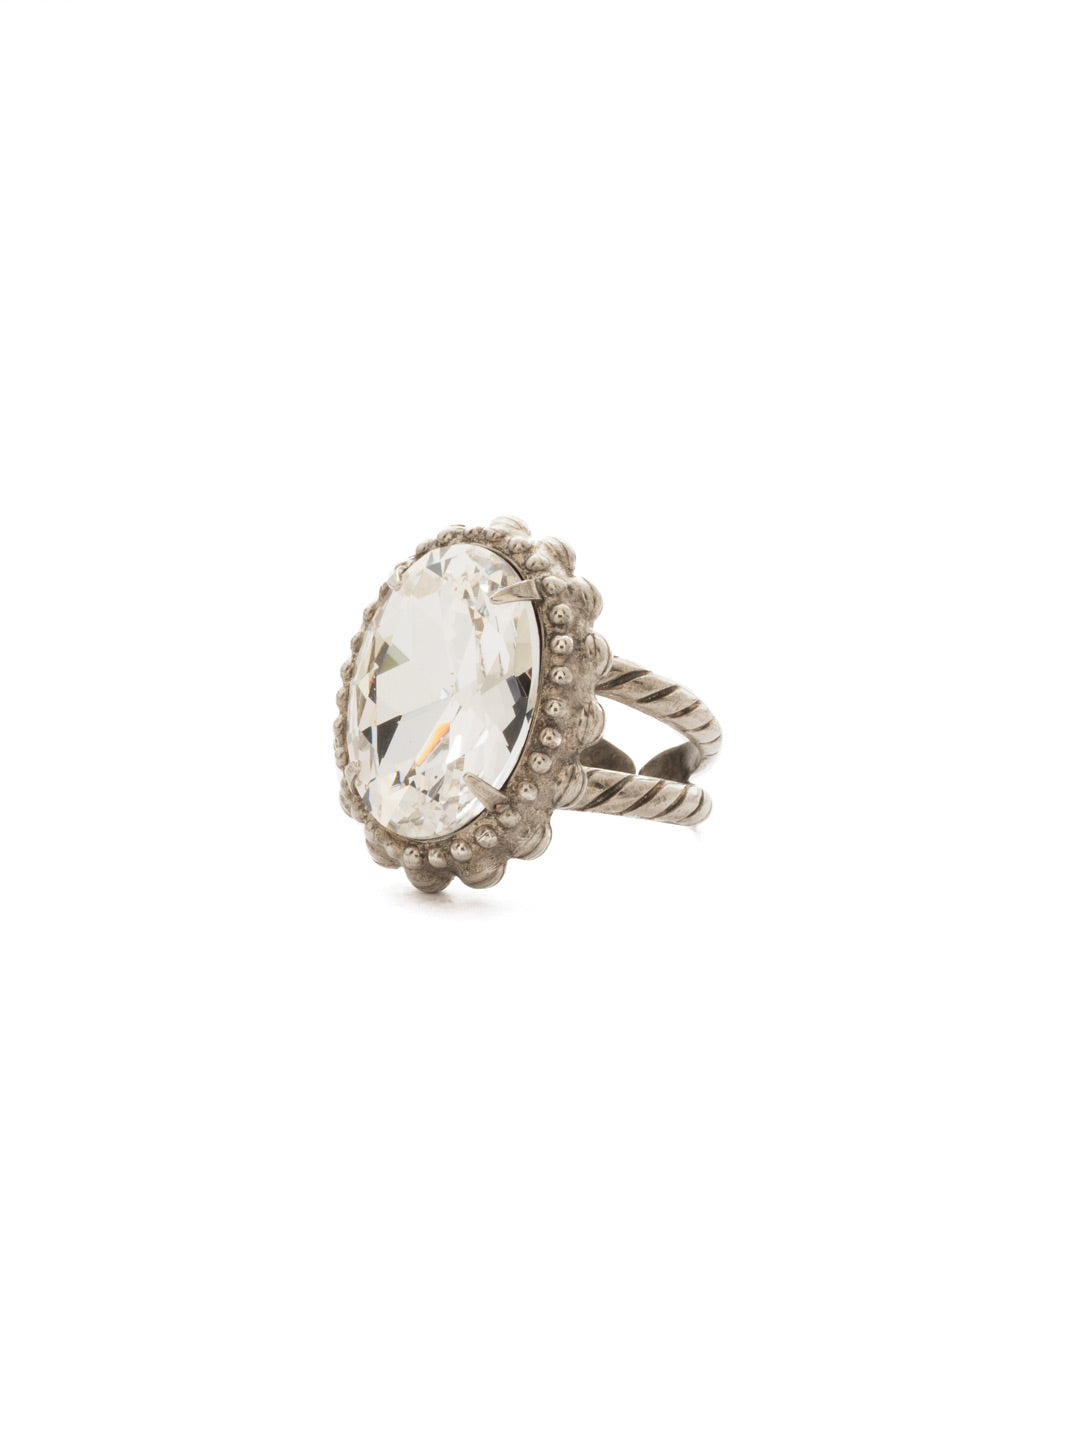 Camellia Ring - RDQ7ASCRY - <p>An elegant oval solitaire with bold metal edging provides high-impact style. From Sorrelli's Crystal collection in our Antique Silver-tone finish.</p>